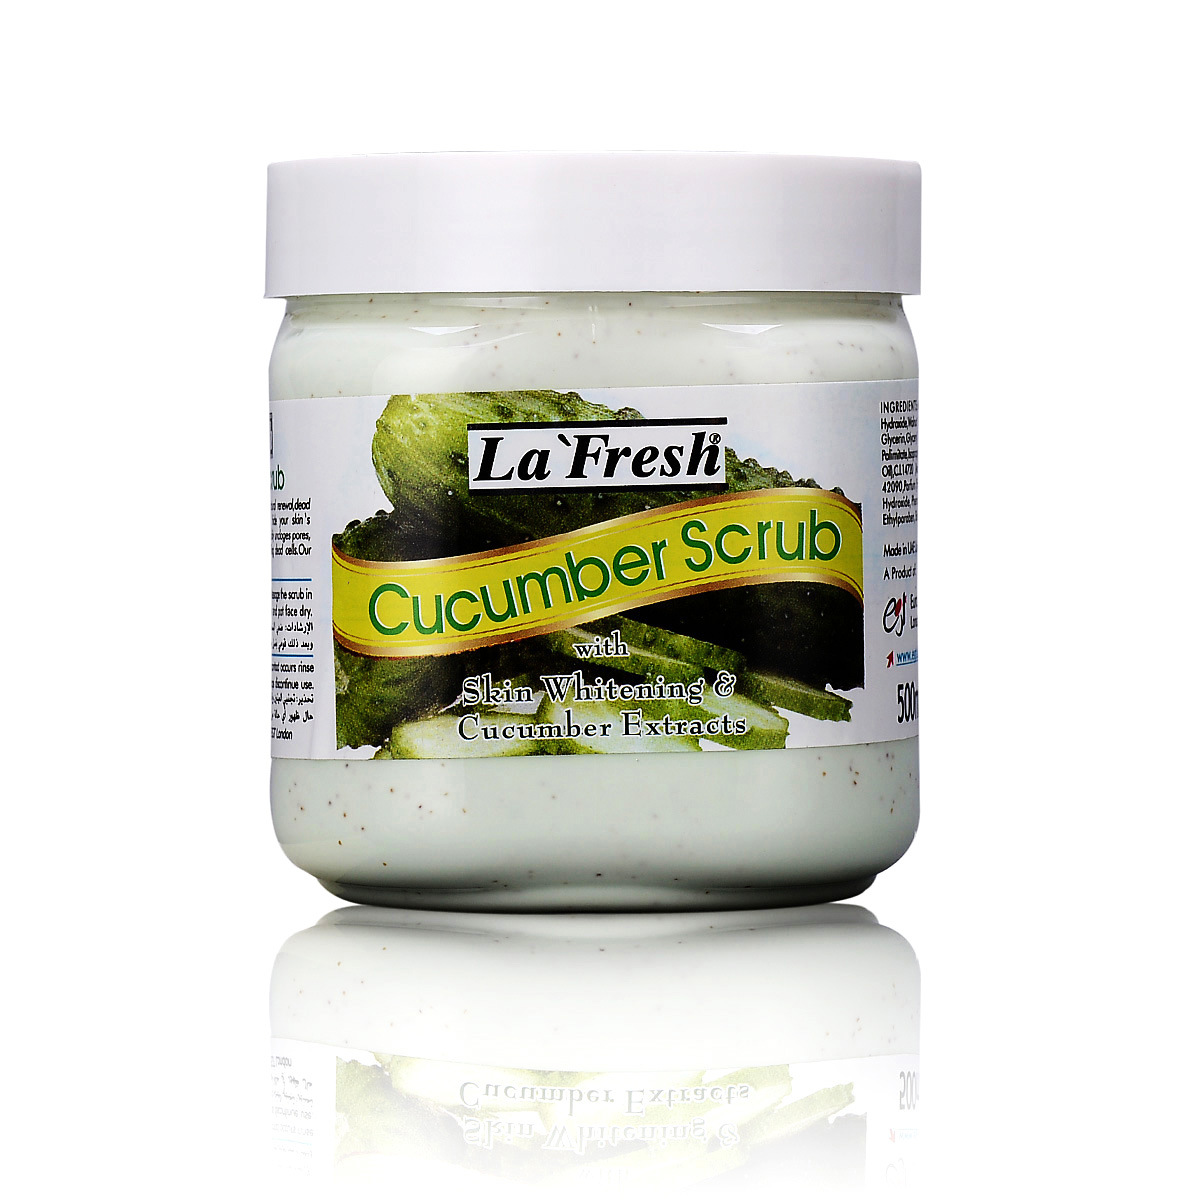 La'fresh Beauty Care Product with Cucumber Scrub